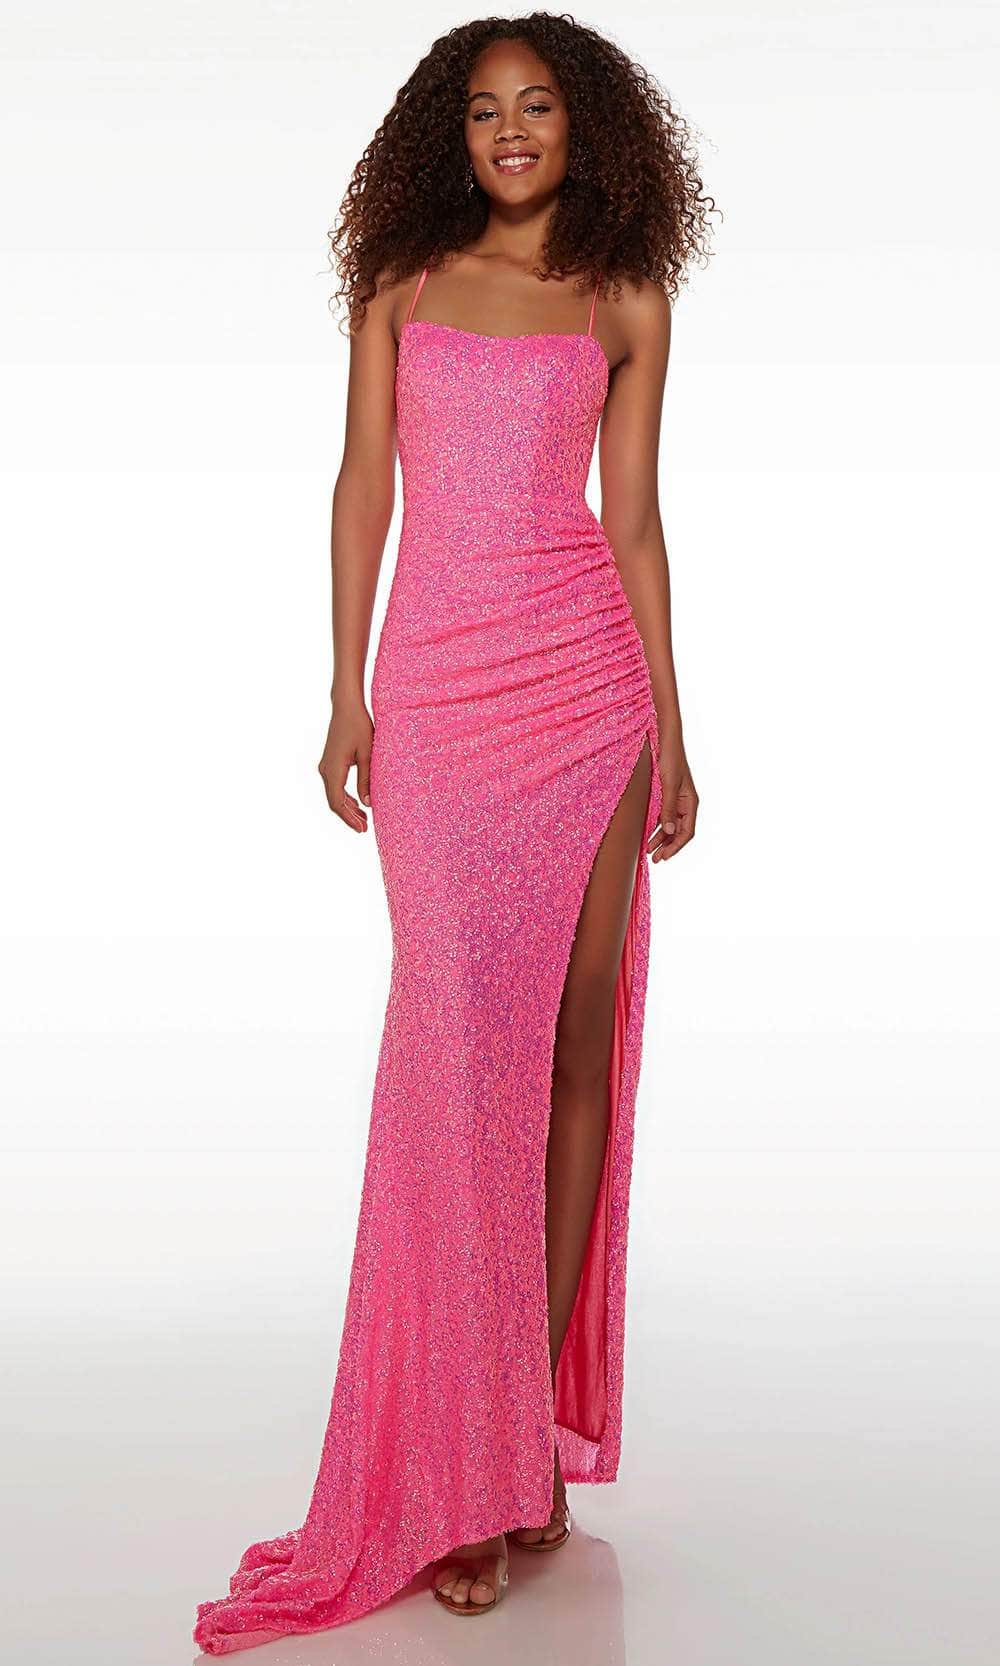 Alyce Paris 61519 - Ruched Sequin Prom Gown Special Occasion Dress 000 / Neon Pink